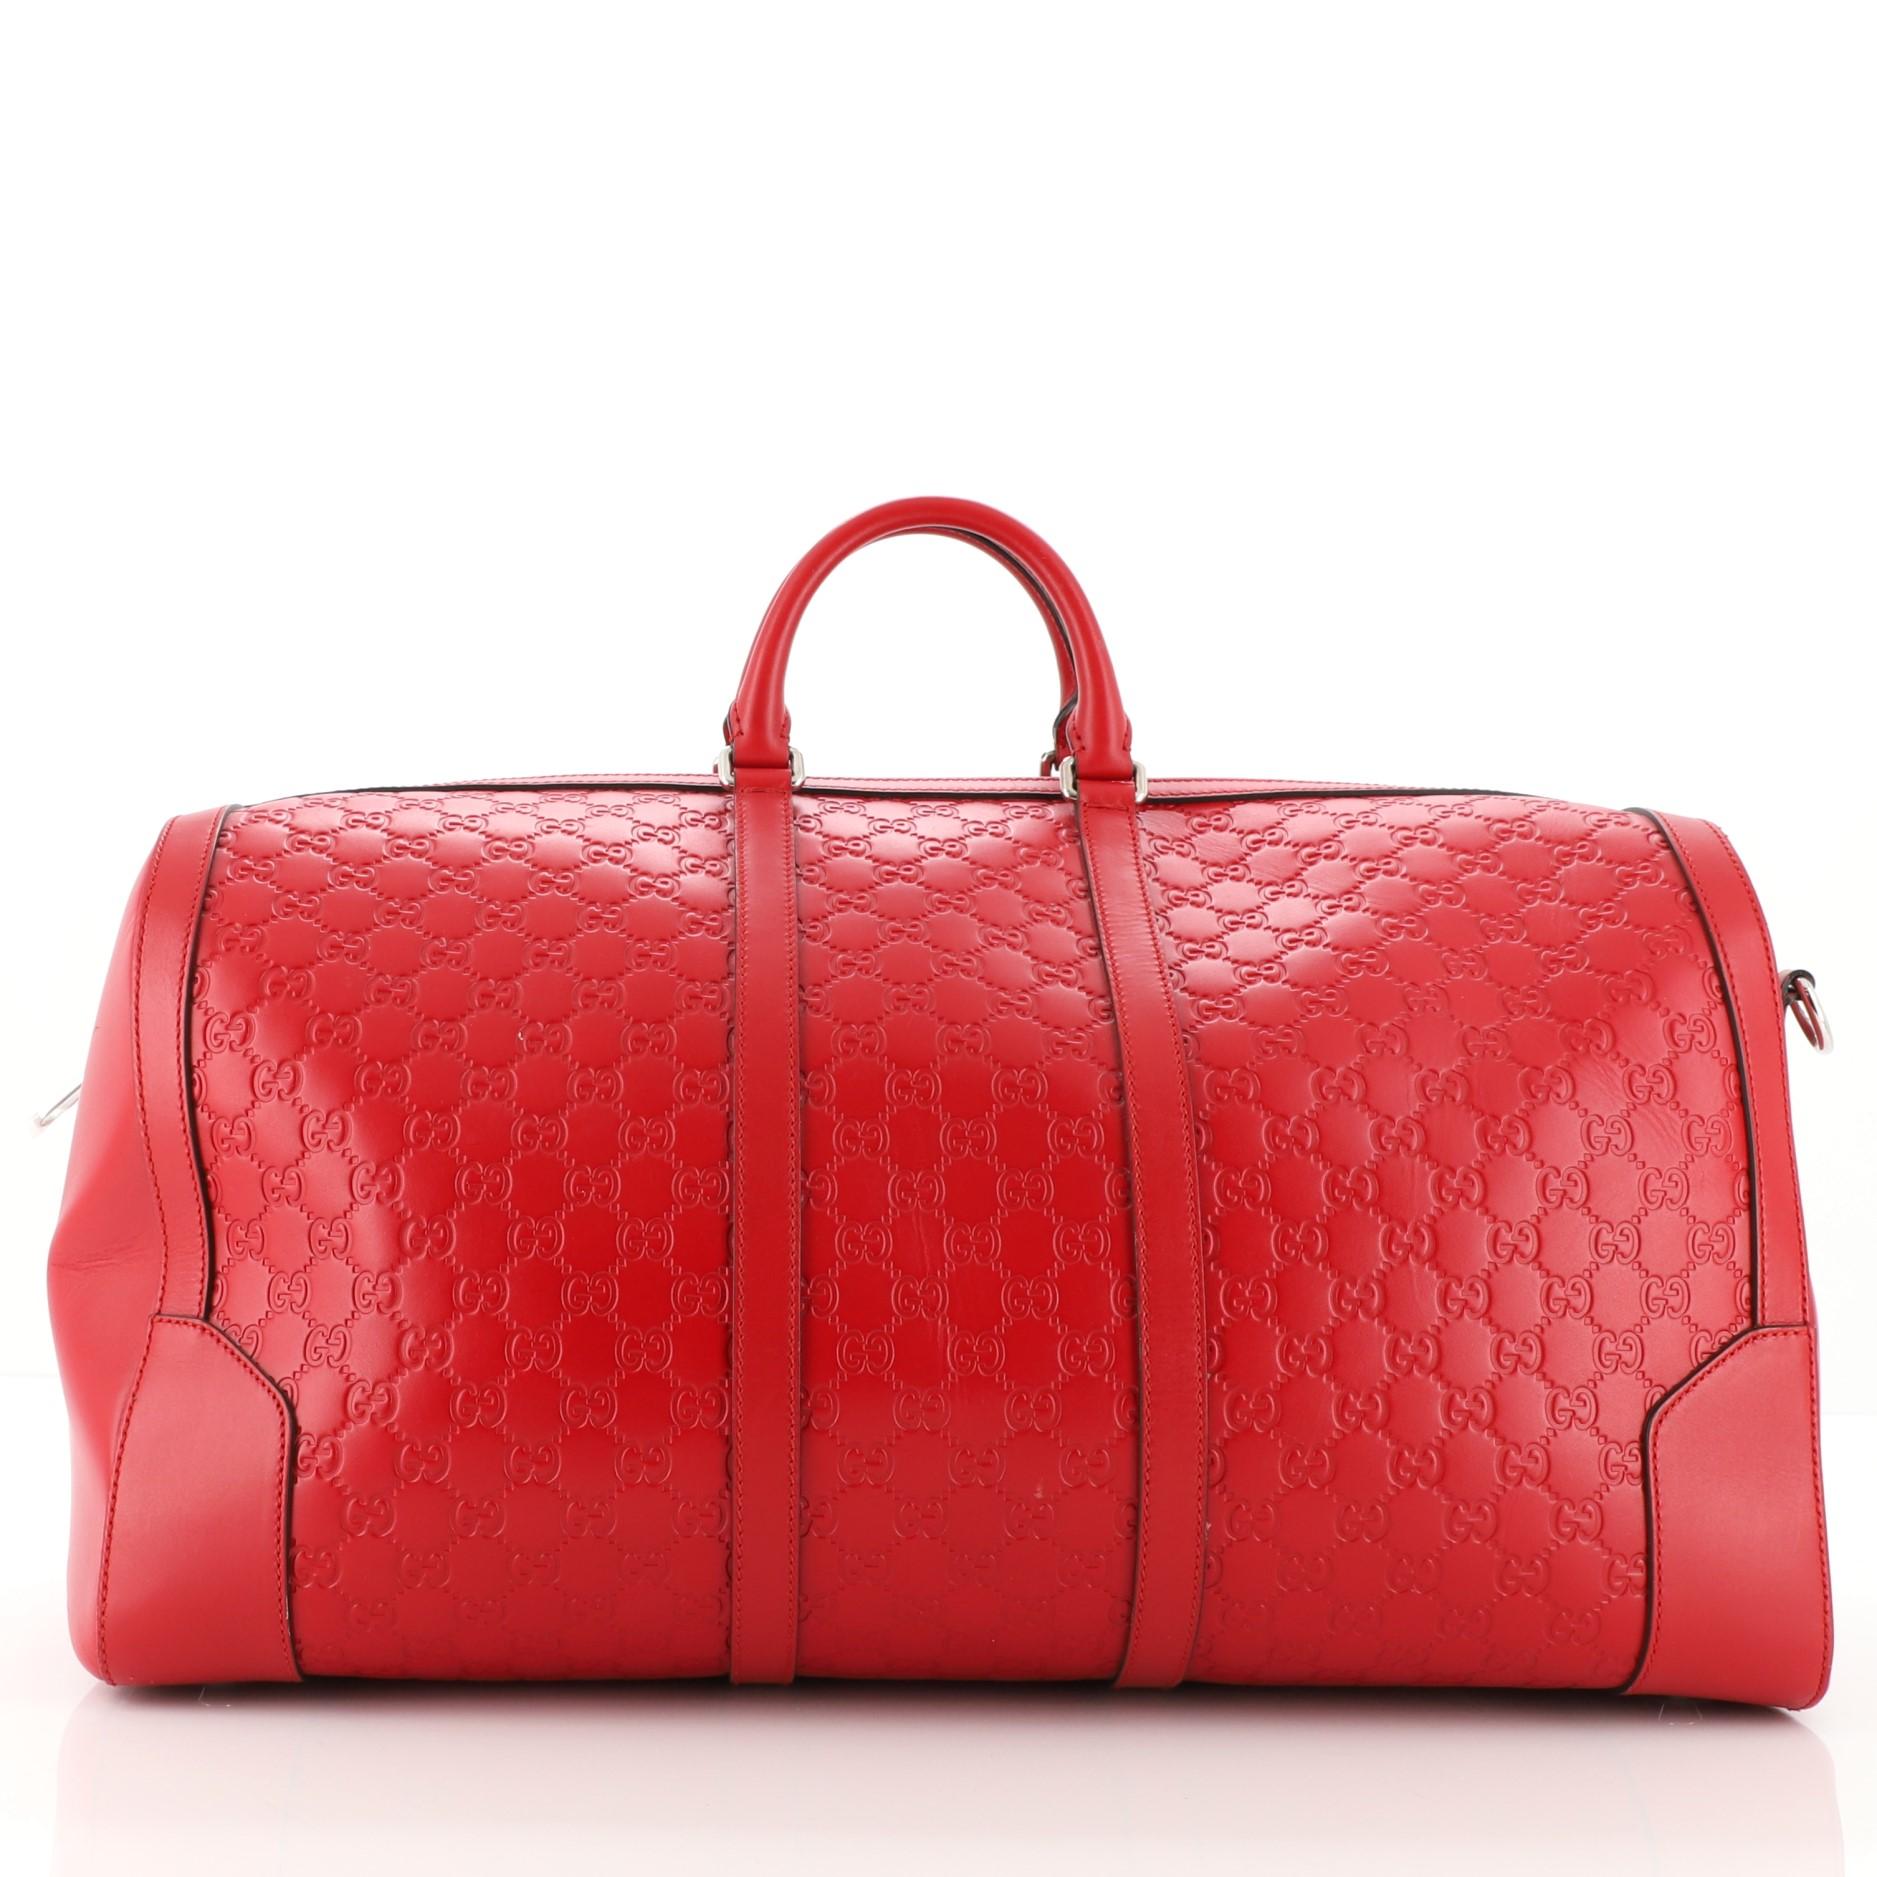 Red Gucci Signature Convertible Duffle Bag Guccissima Leather Large